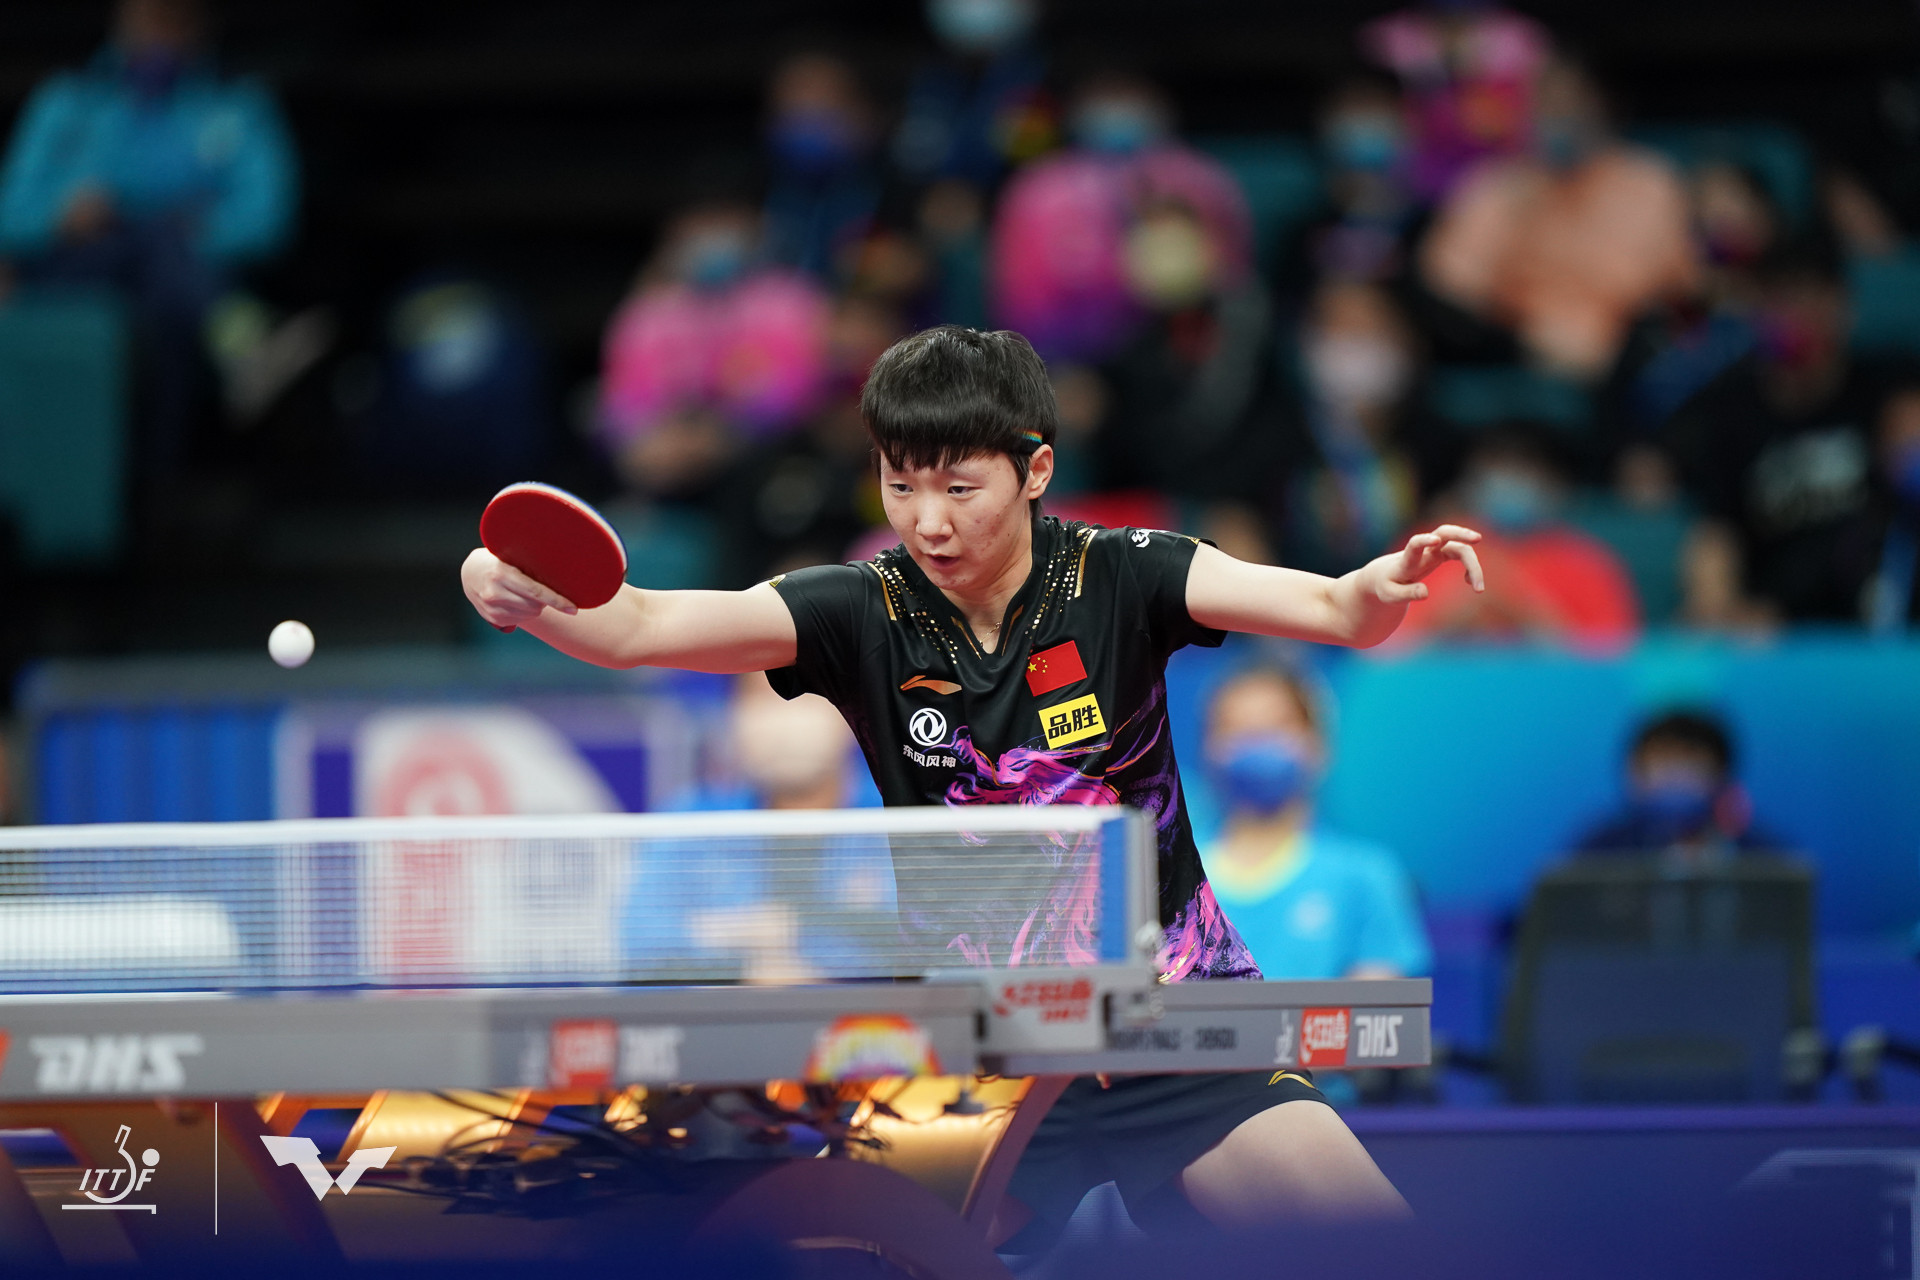 China to face India and Hungary in ITTF World Team Table Tennis Championships knockouts